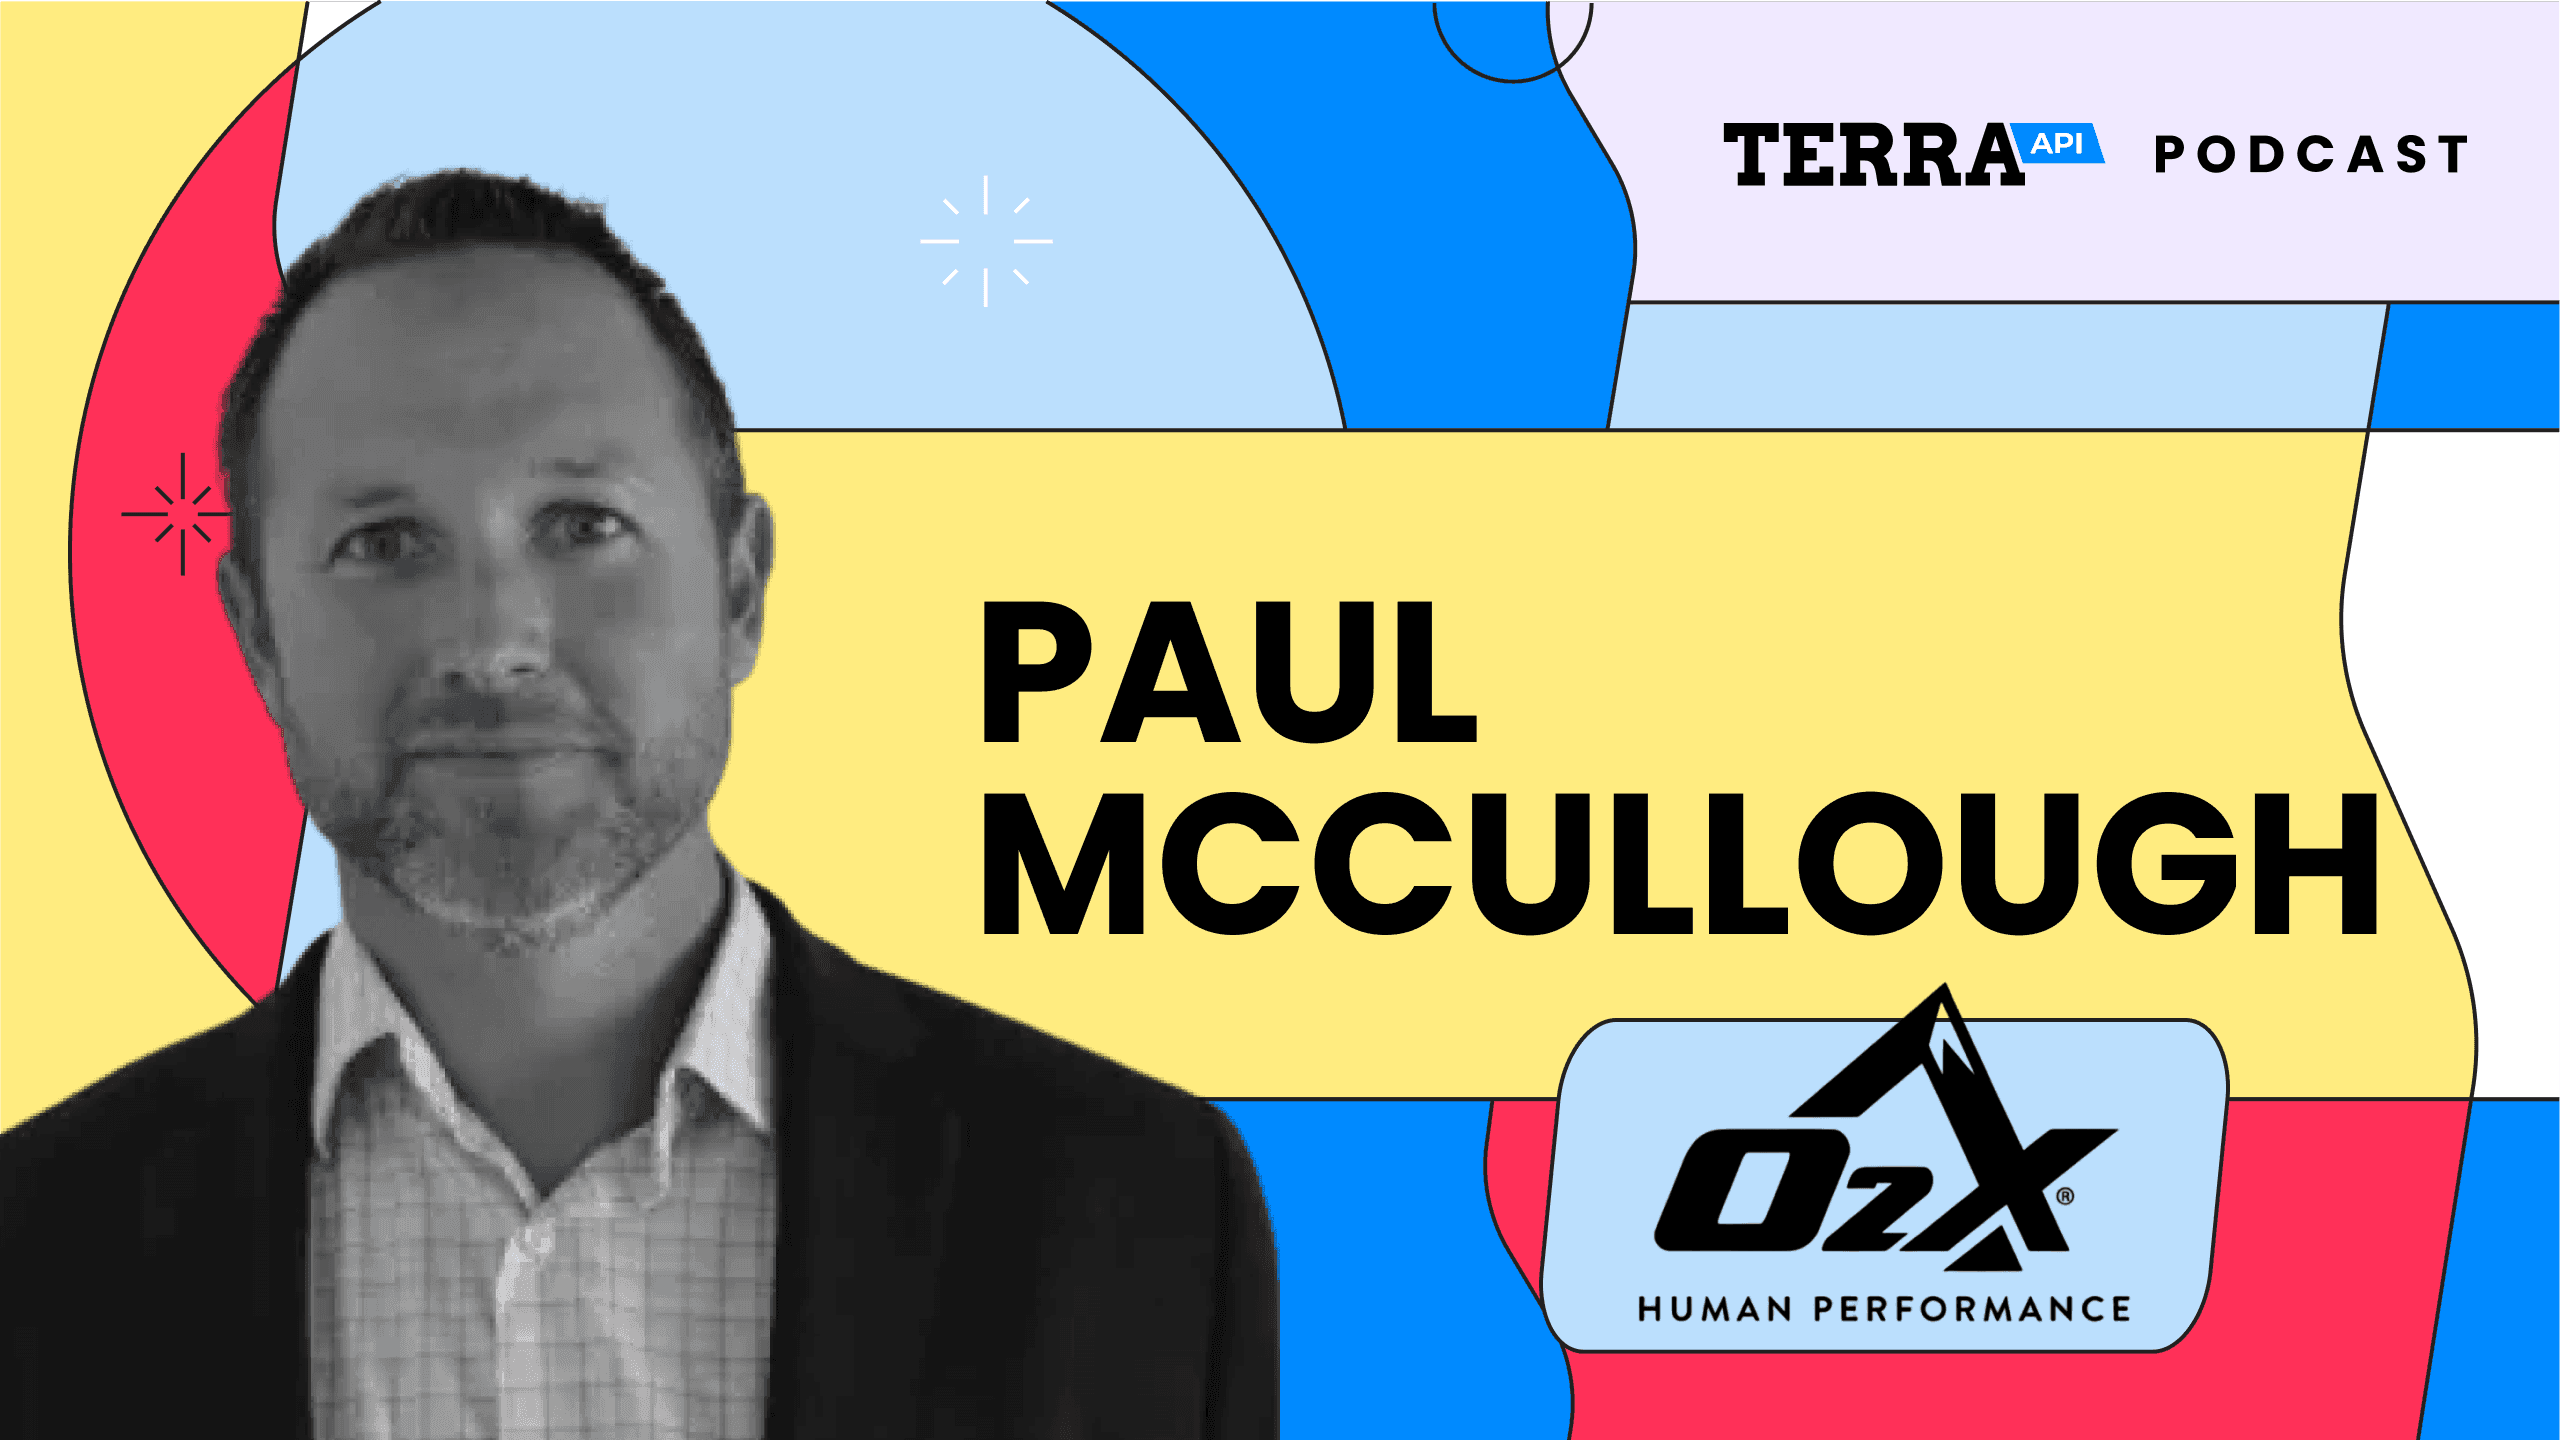 Co-Founder of O2X Human Performance: Phil McCullough